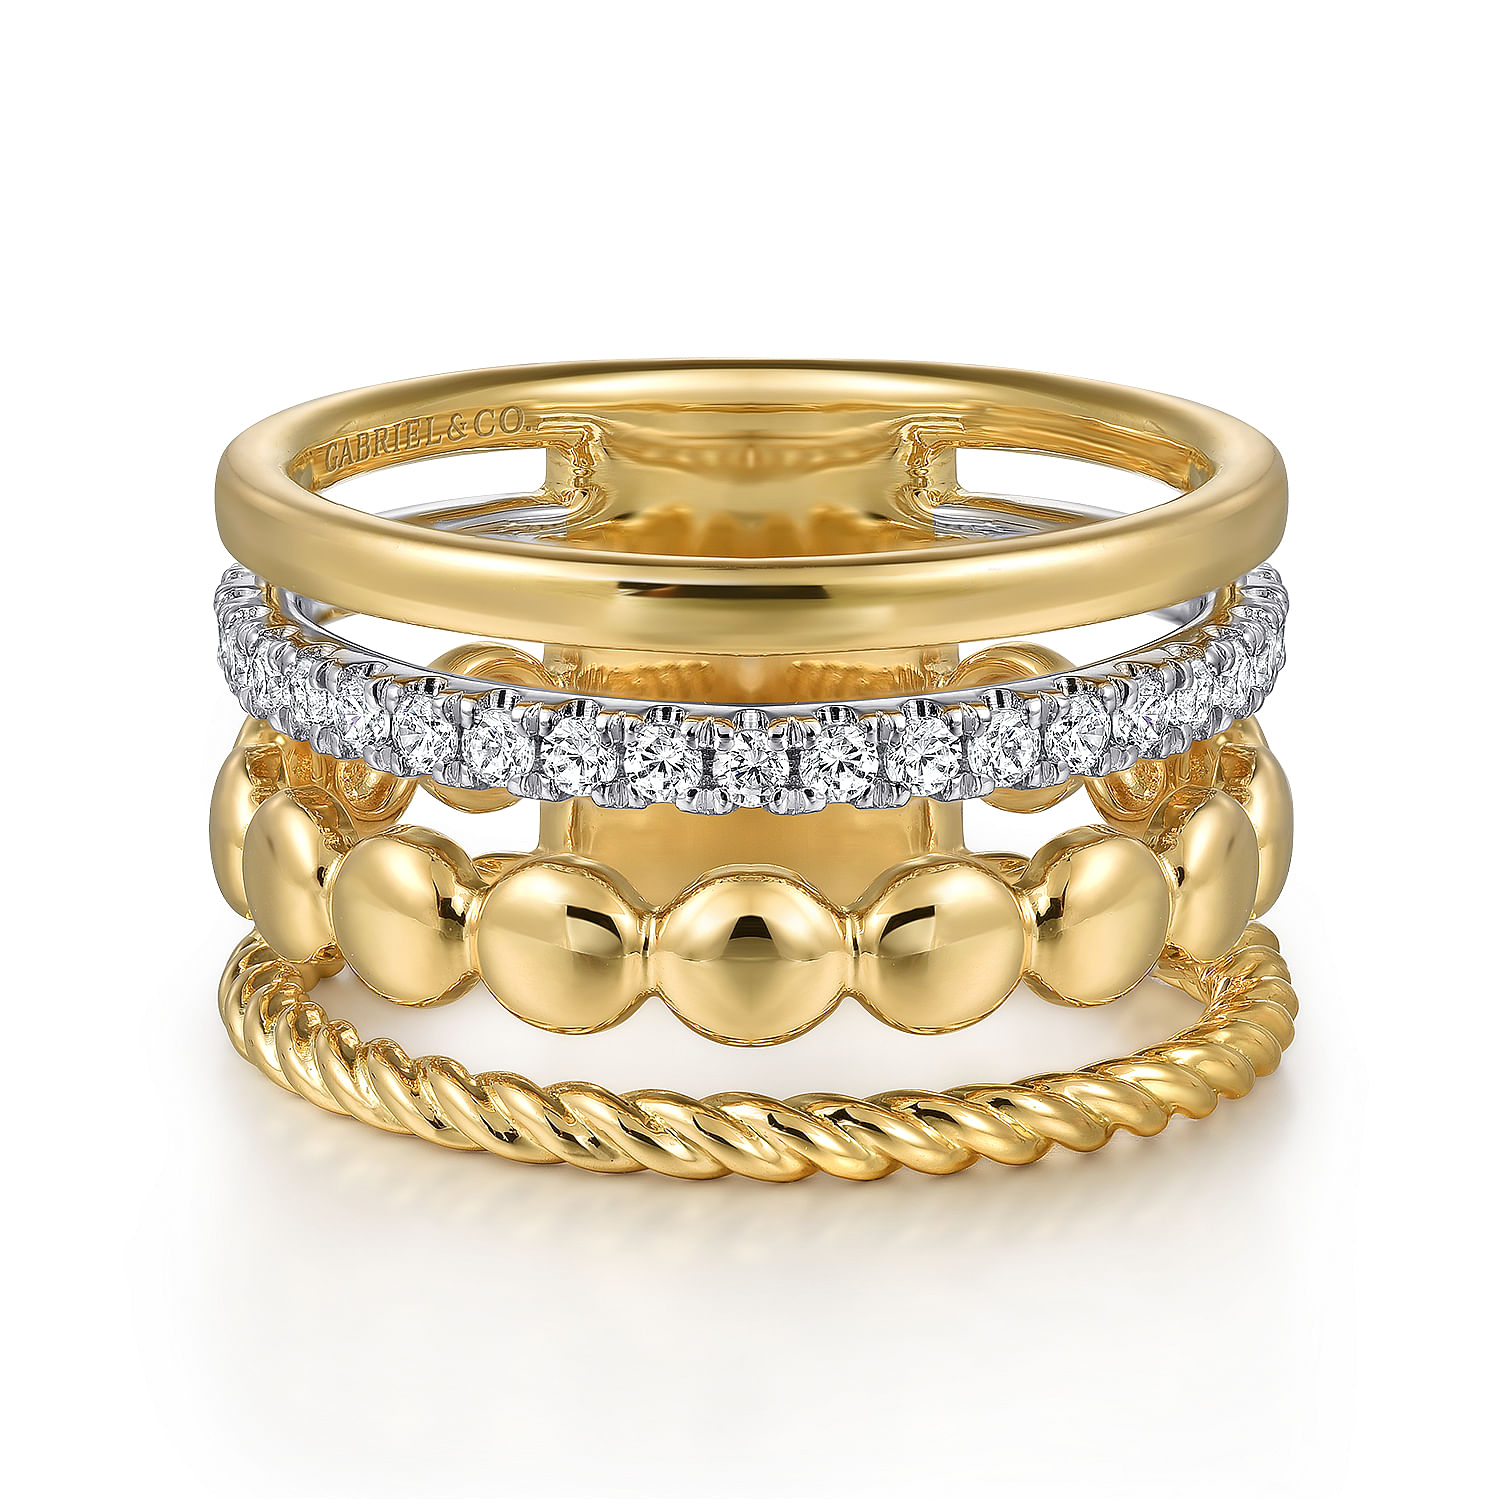 14K White and Yellow Gold Diamond Rope Easy Stackable Ladies Ring